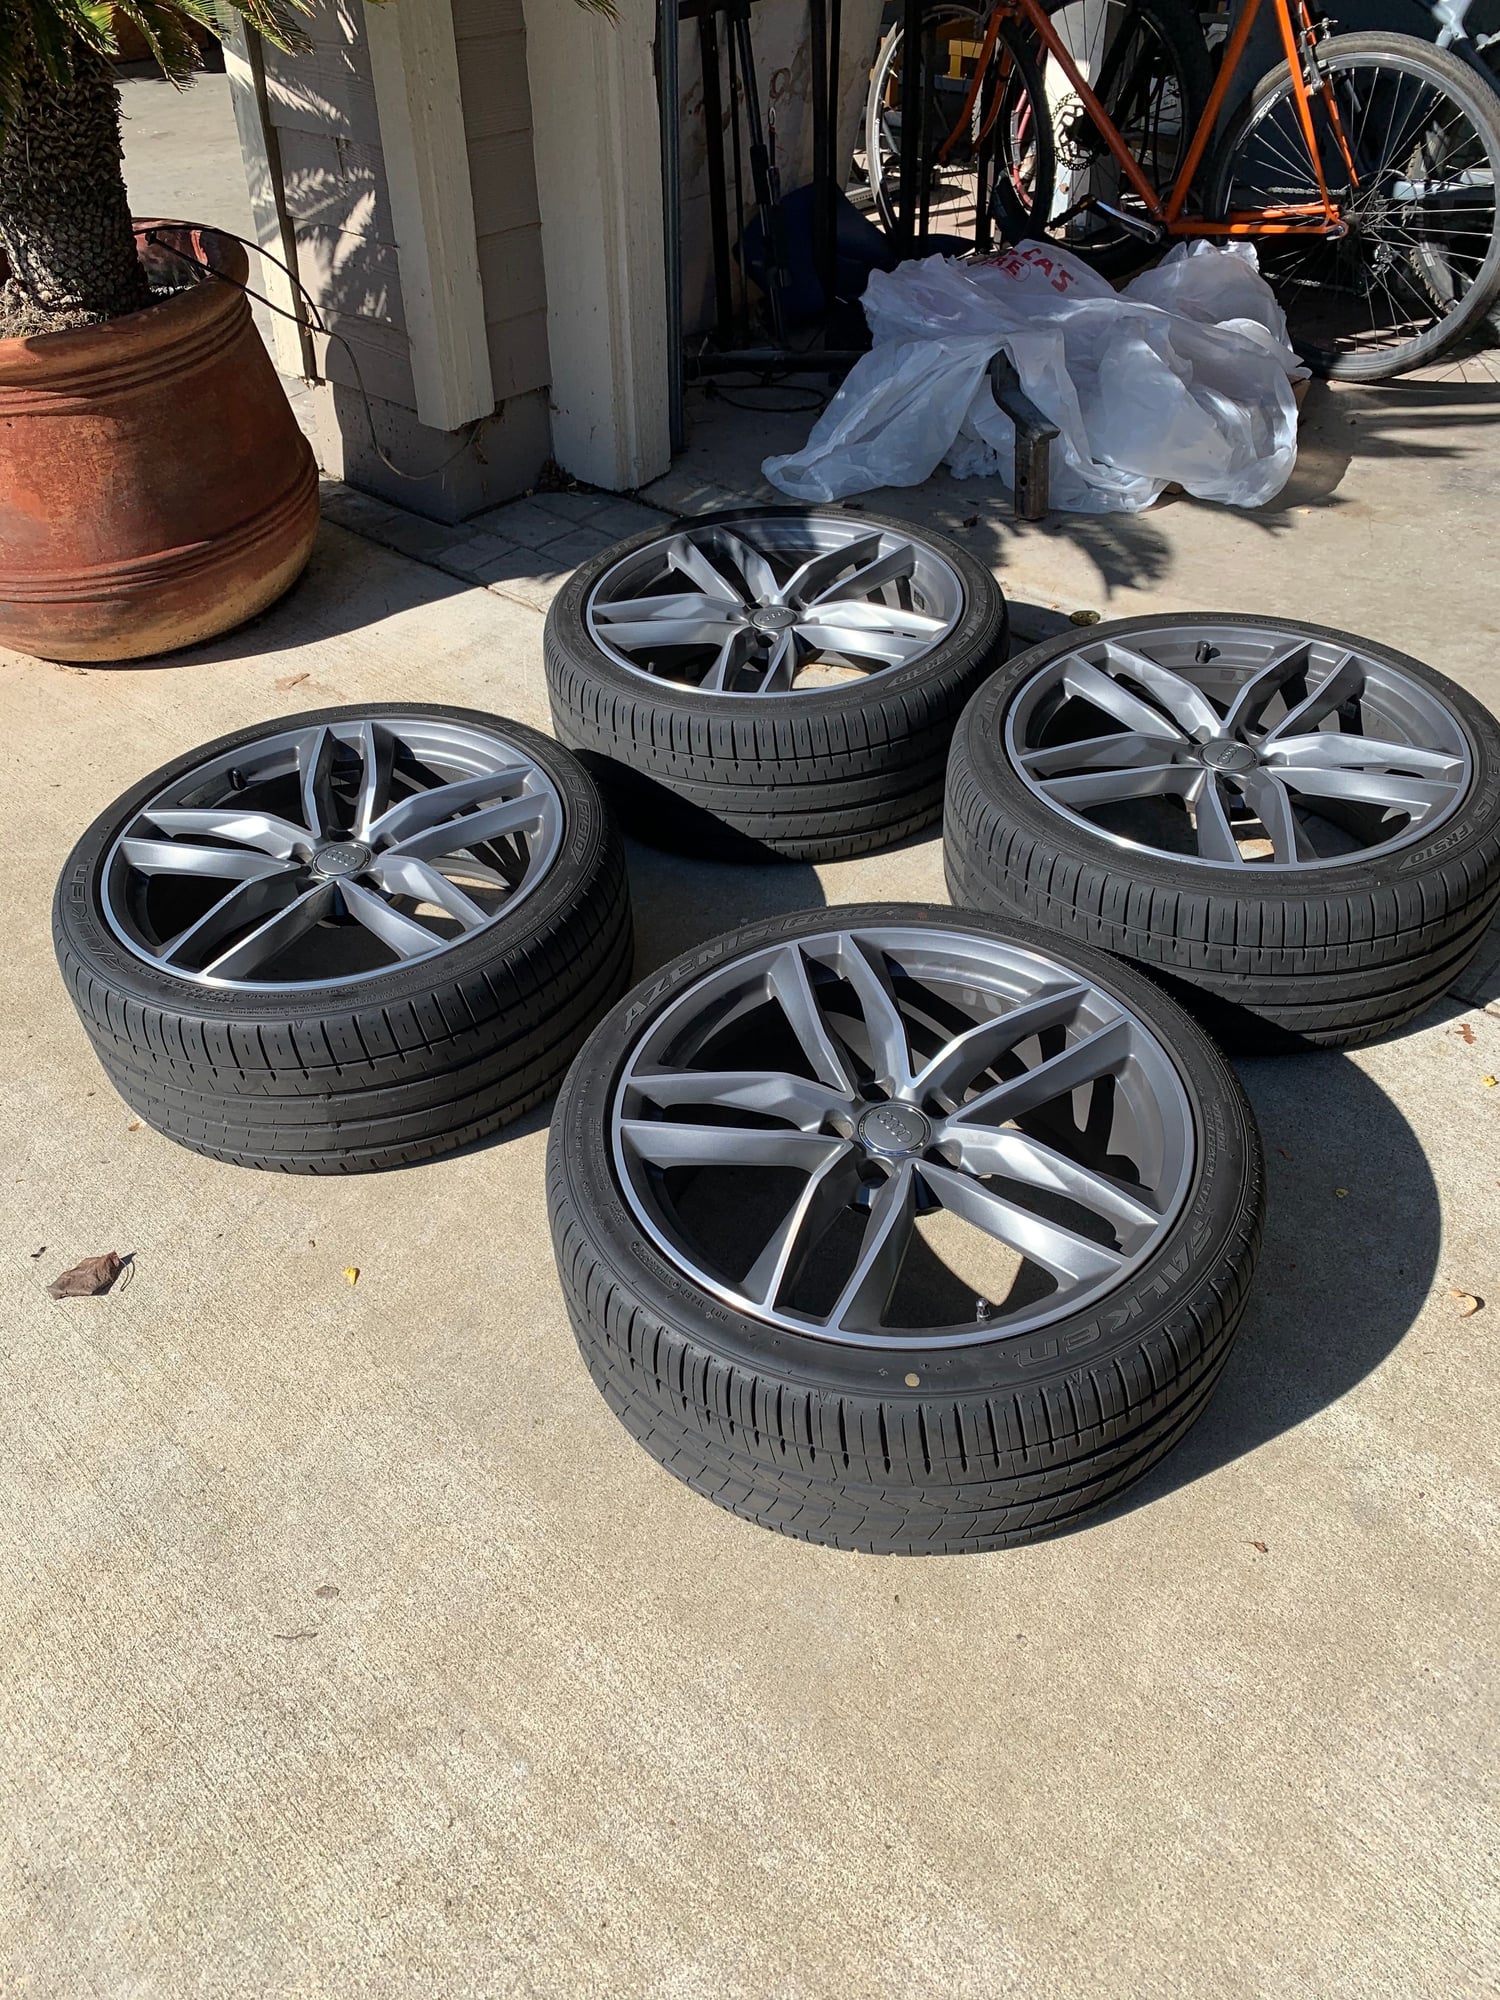 Wheels and Tires/Axles - Wheels with tires 20 x 8.5 S6 double 5 spoke - Used - 2007 to 2018 Audi S6 - 2007 to 2018 Audi A6 - Brentwood, CA 94513, United States